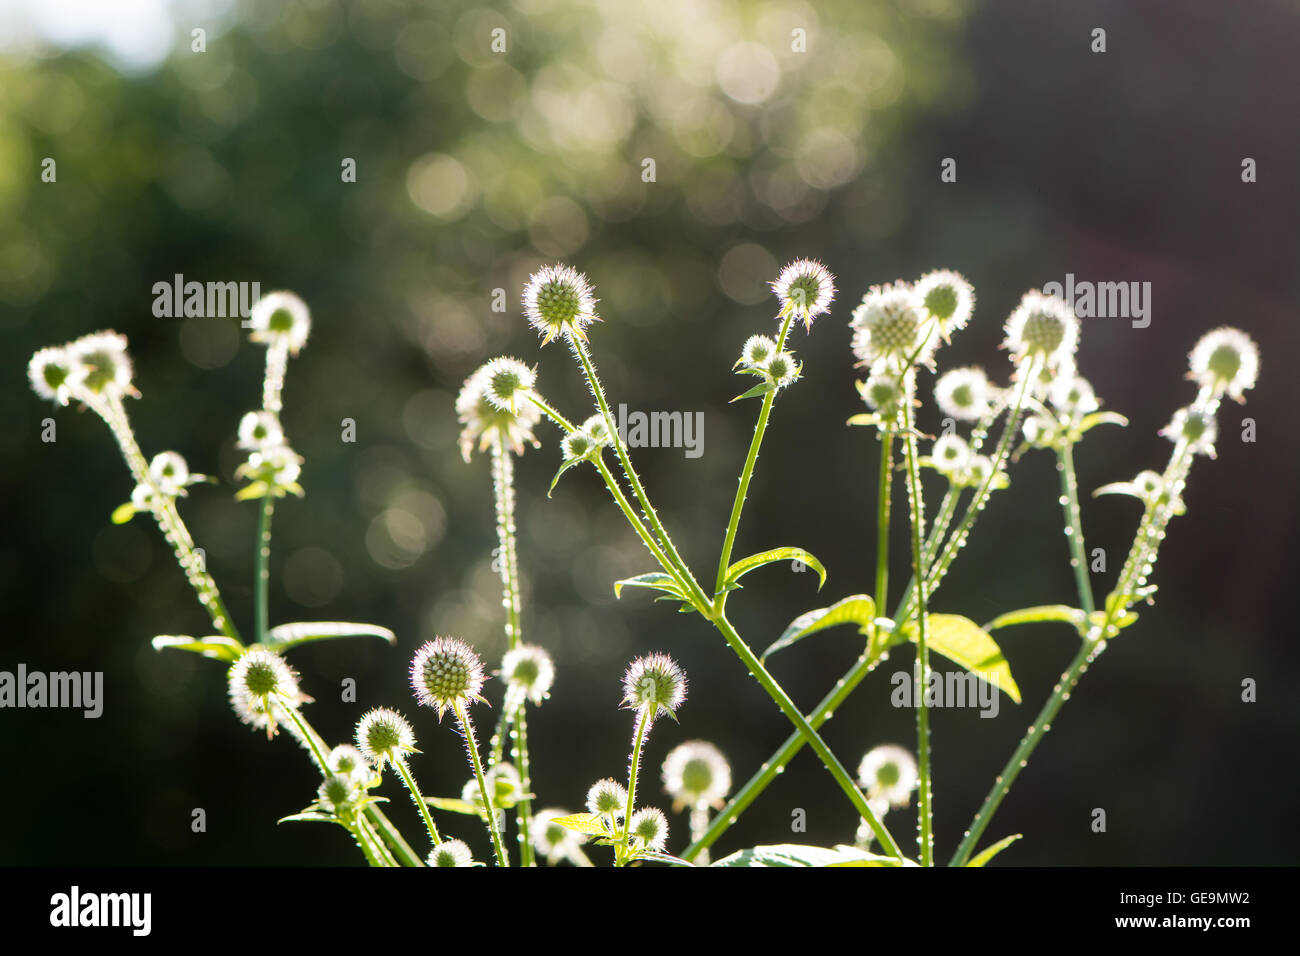 Small teasel (Dipsacus pilosus) flowers in bud. Flowerheads backlit by sunlight on prickly plant in the family Dipsaceae Stock Photo